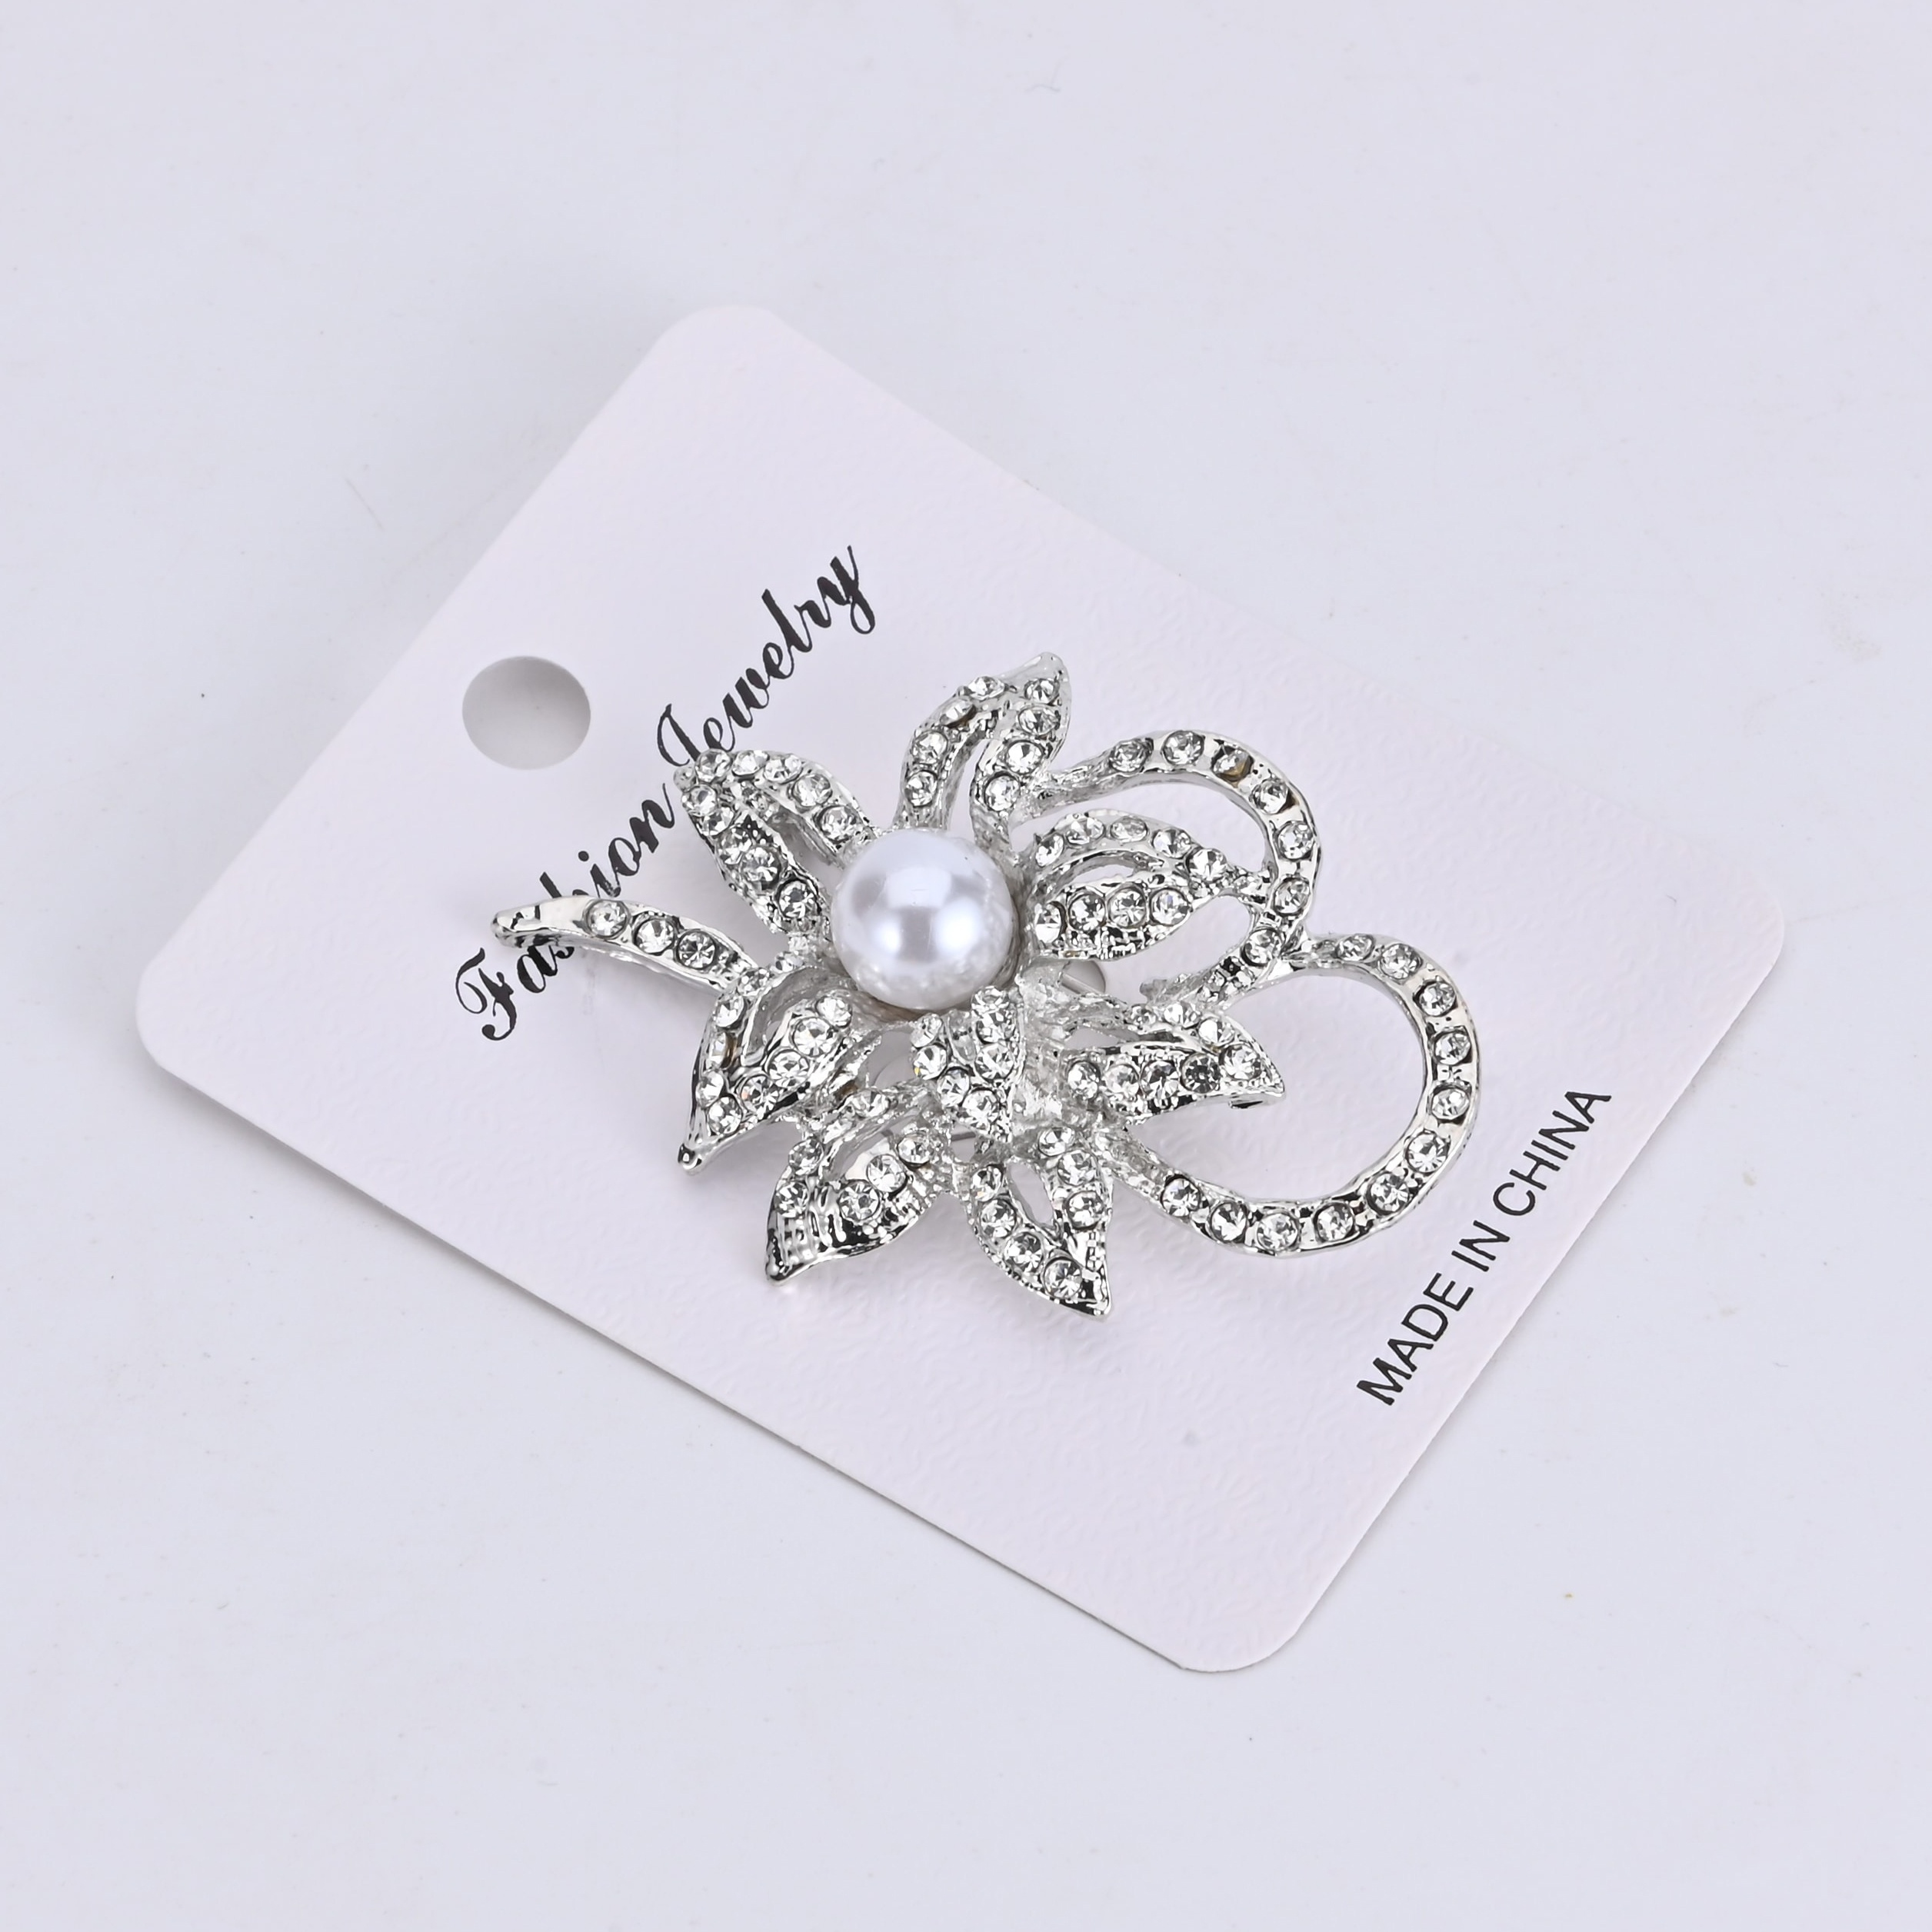 White Flower Brooch Pin with Silver Decorations